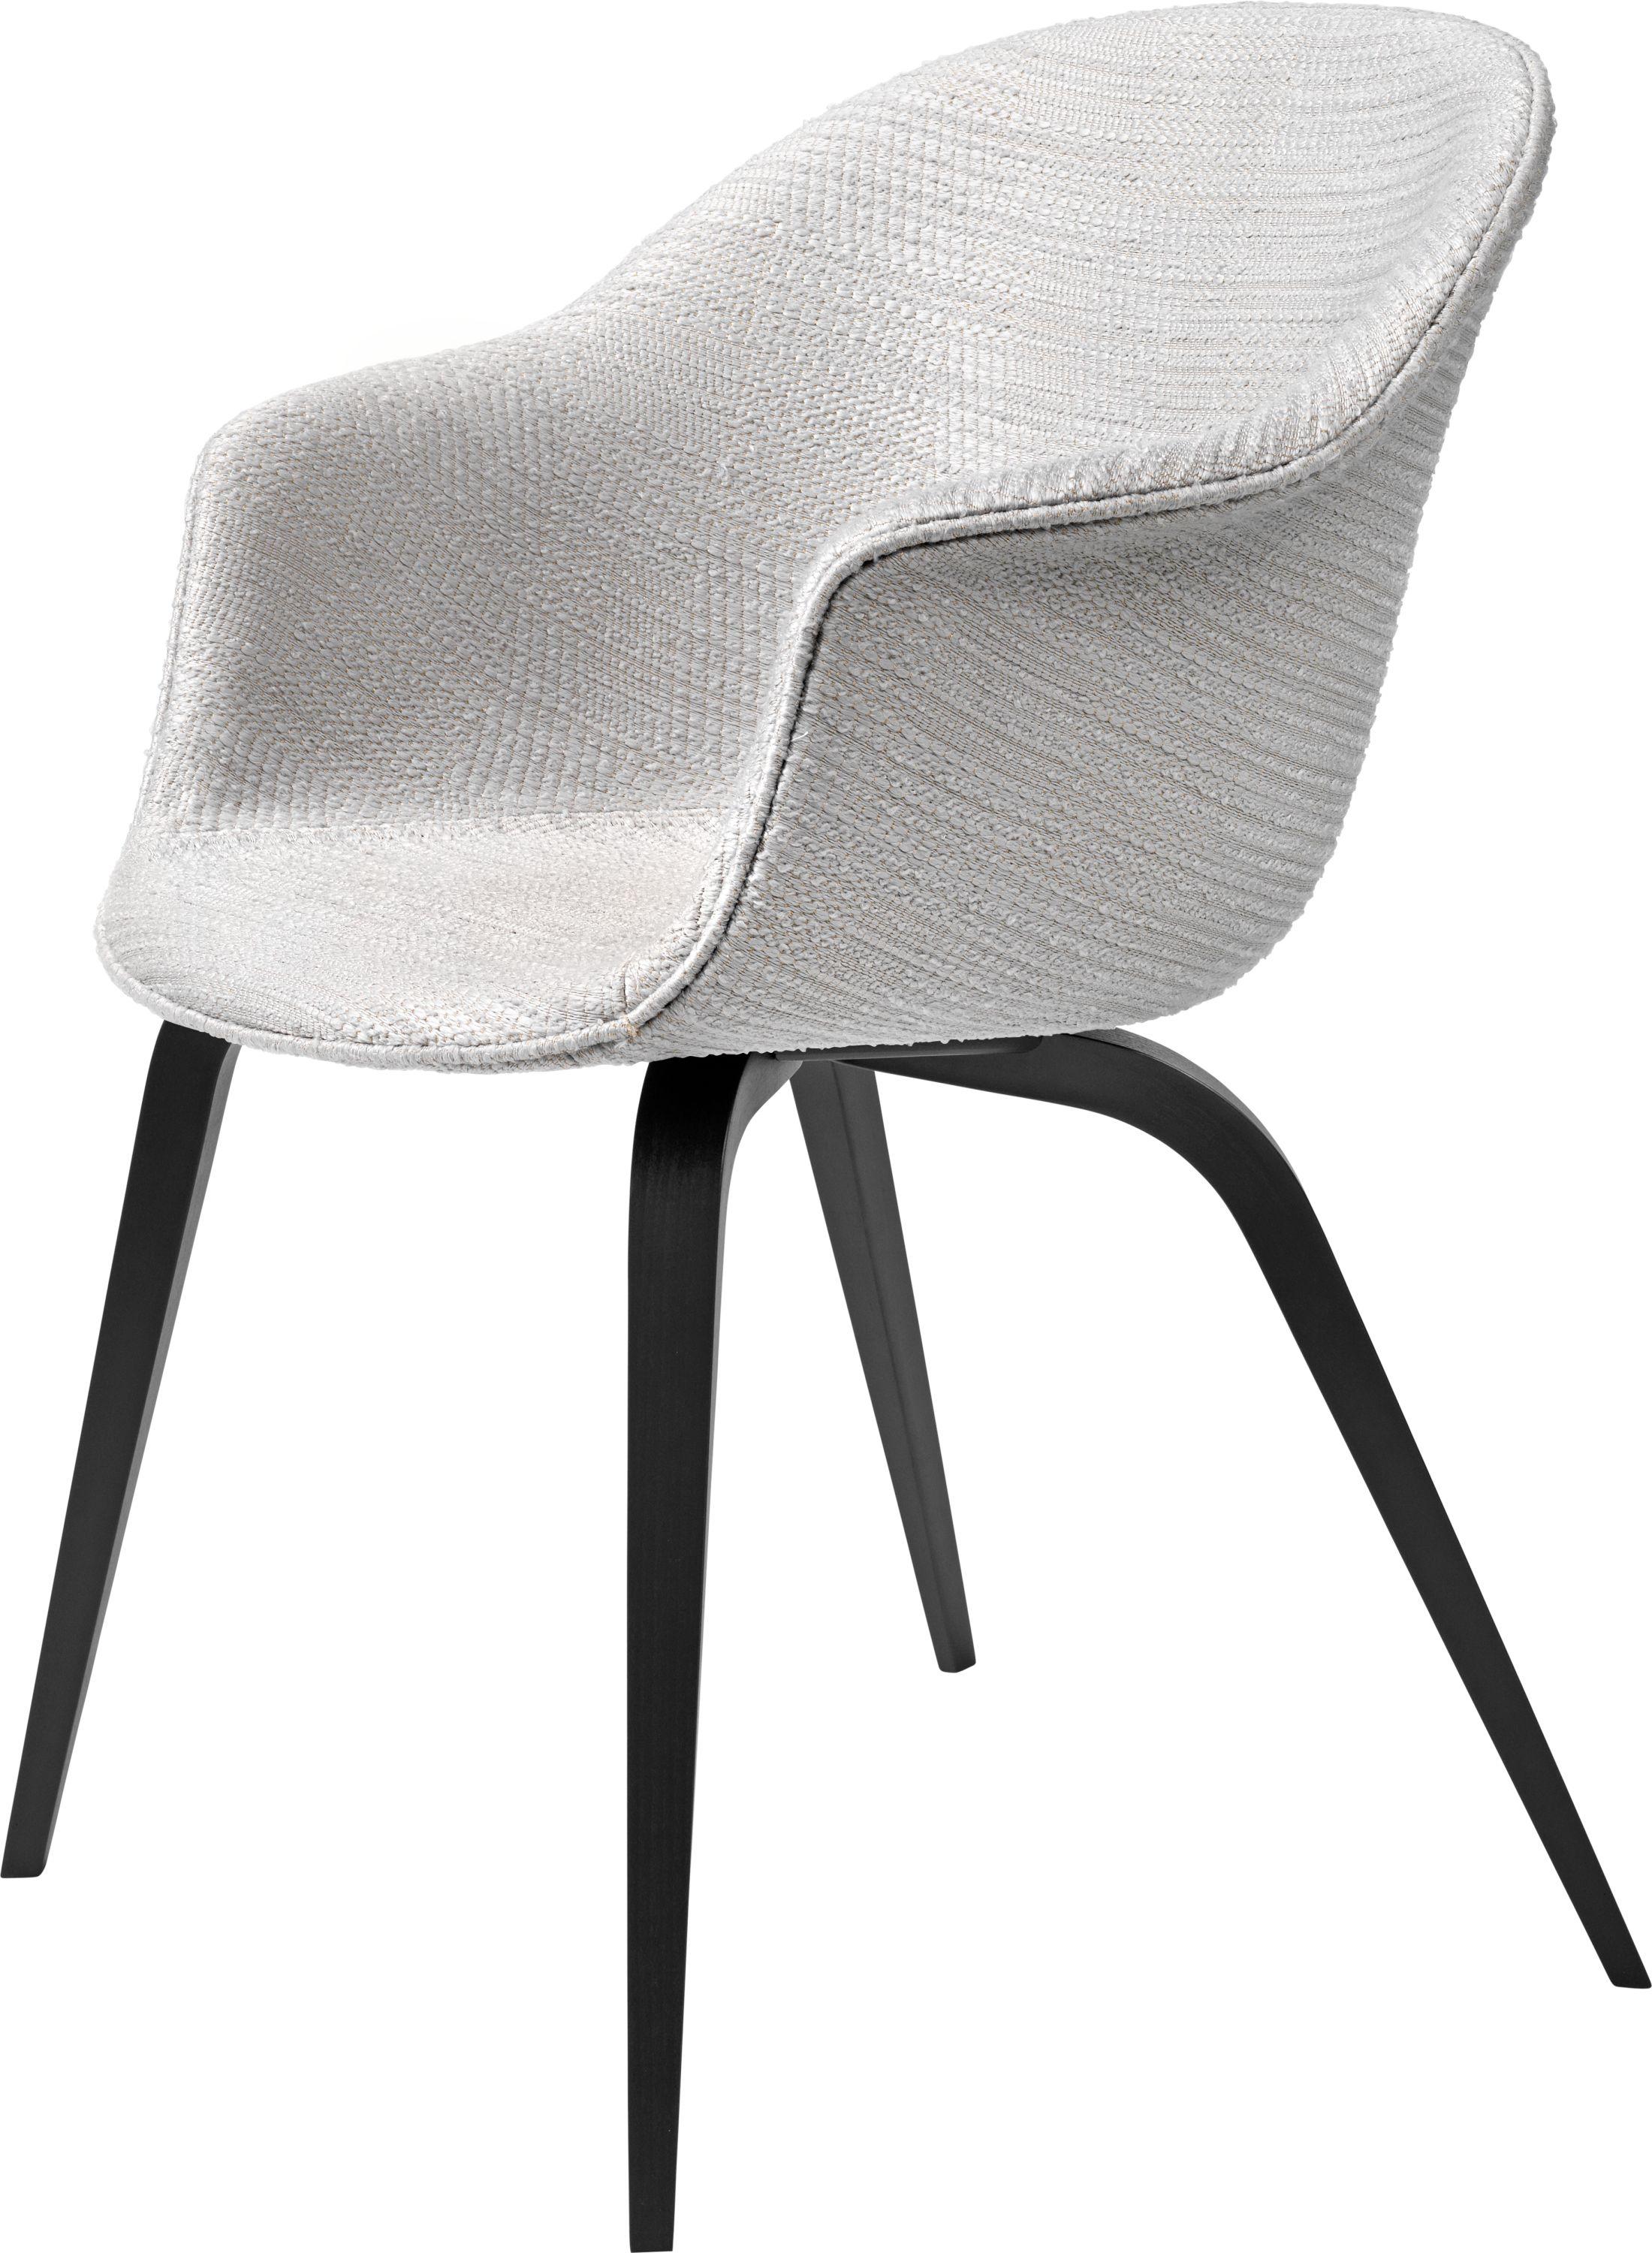 GamFratesi 'Bat' Dining Chair in Grey with Antique Brass Conic Base 10